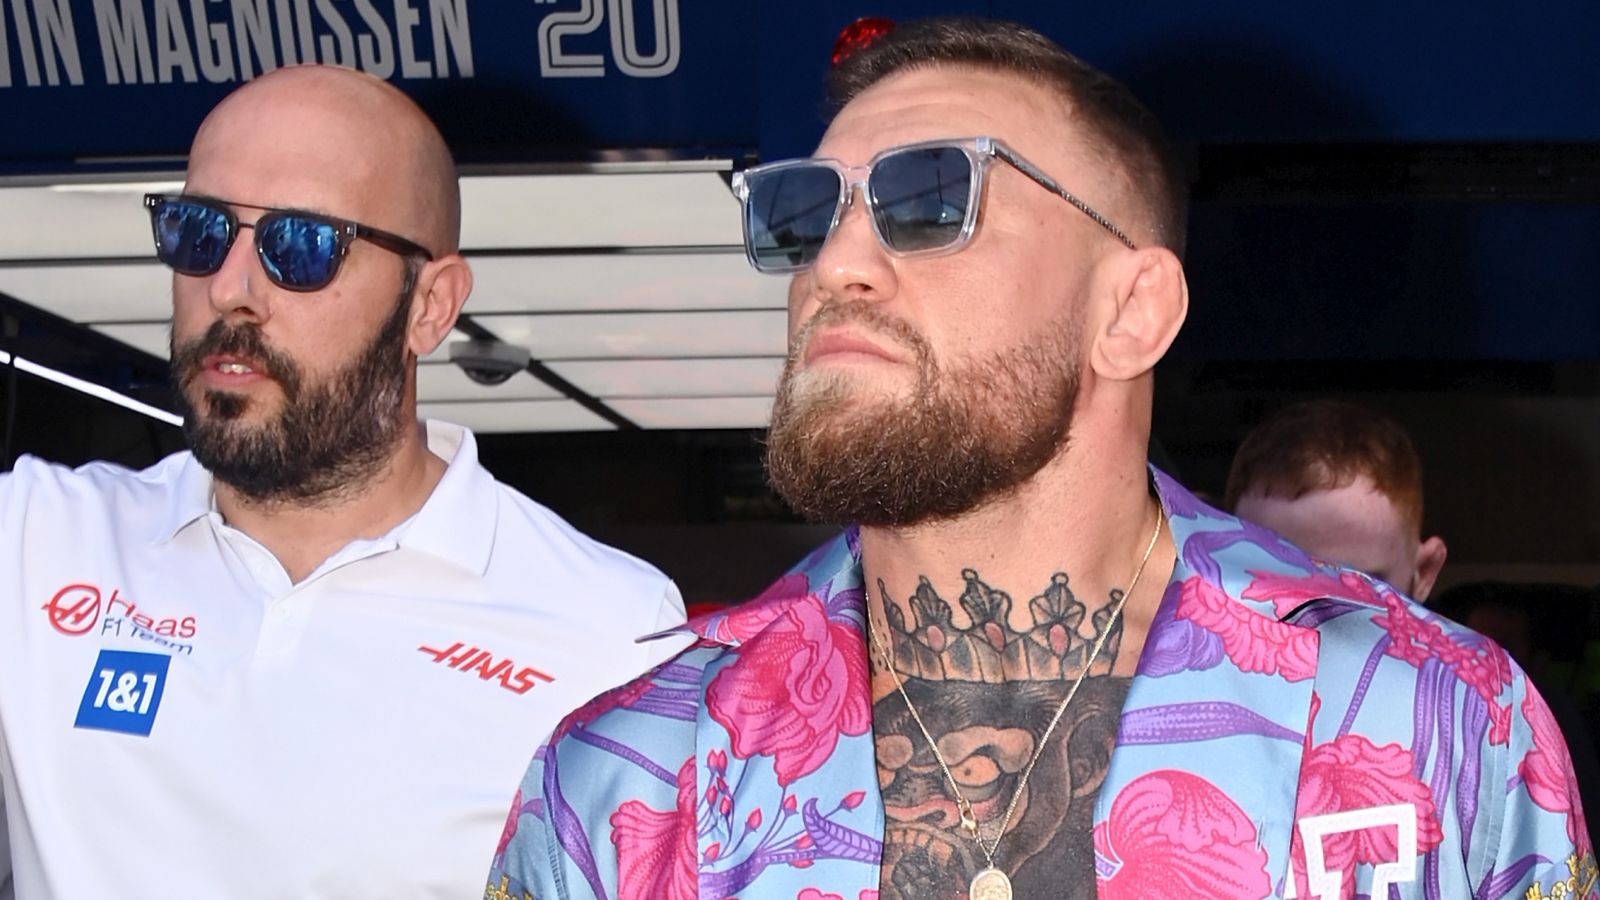 Conor McGregor says he will box again, that UFC story is ‘far from over’